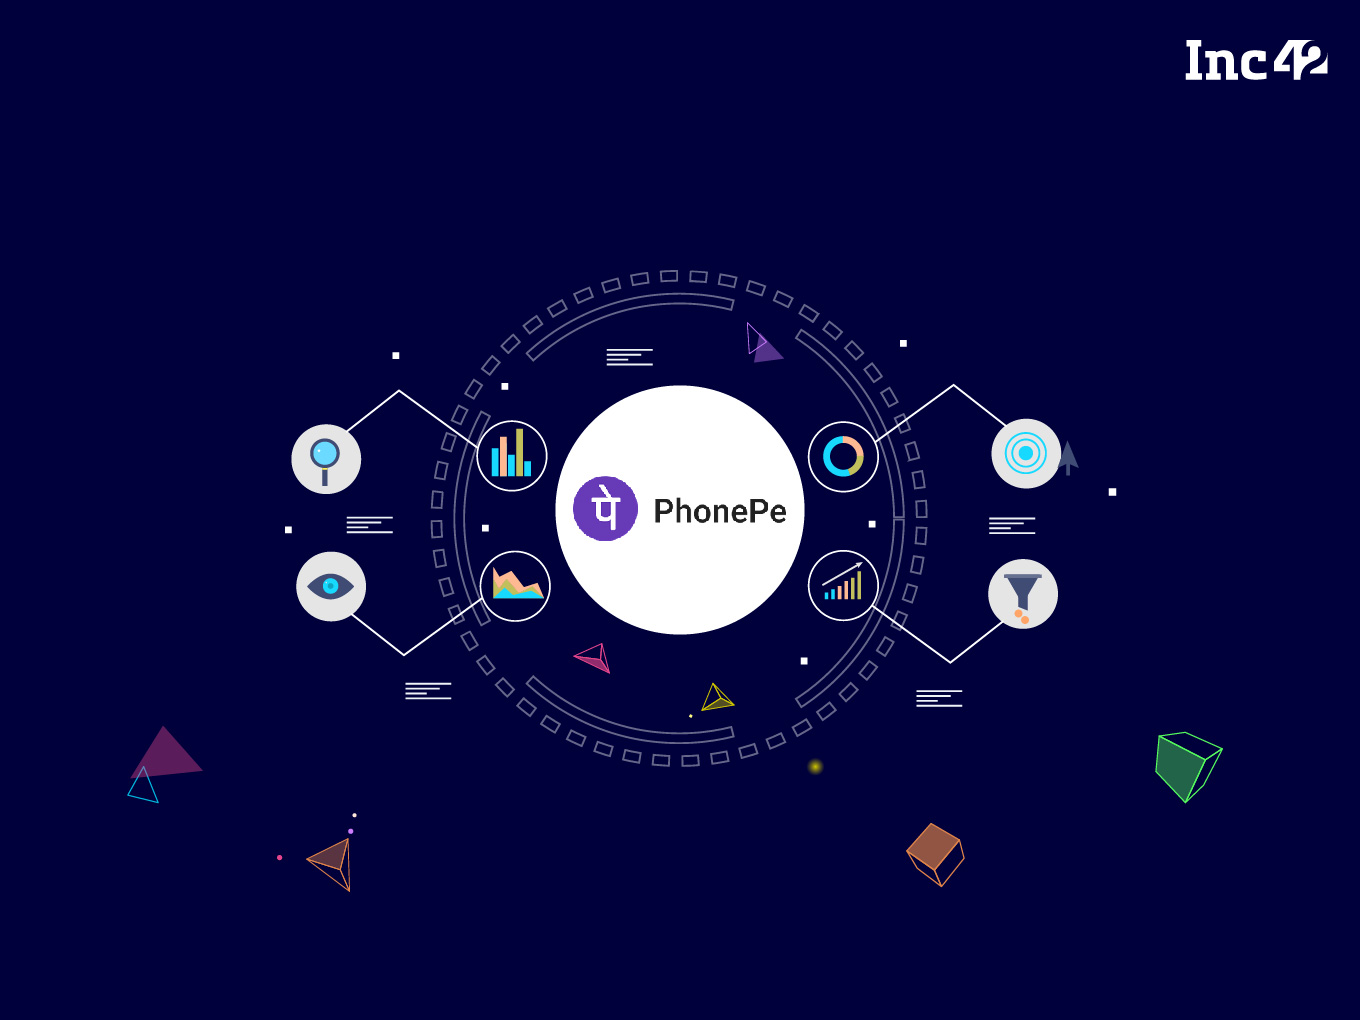 [What The Financials] PhonePe Continues To Burn Cash But Revenue Grows 4X